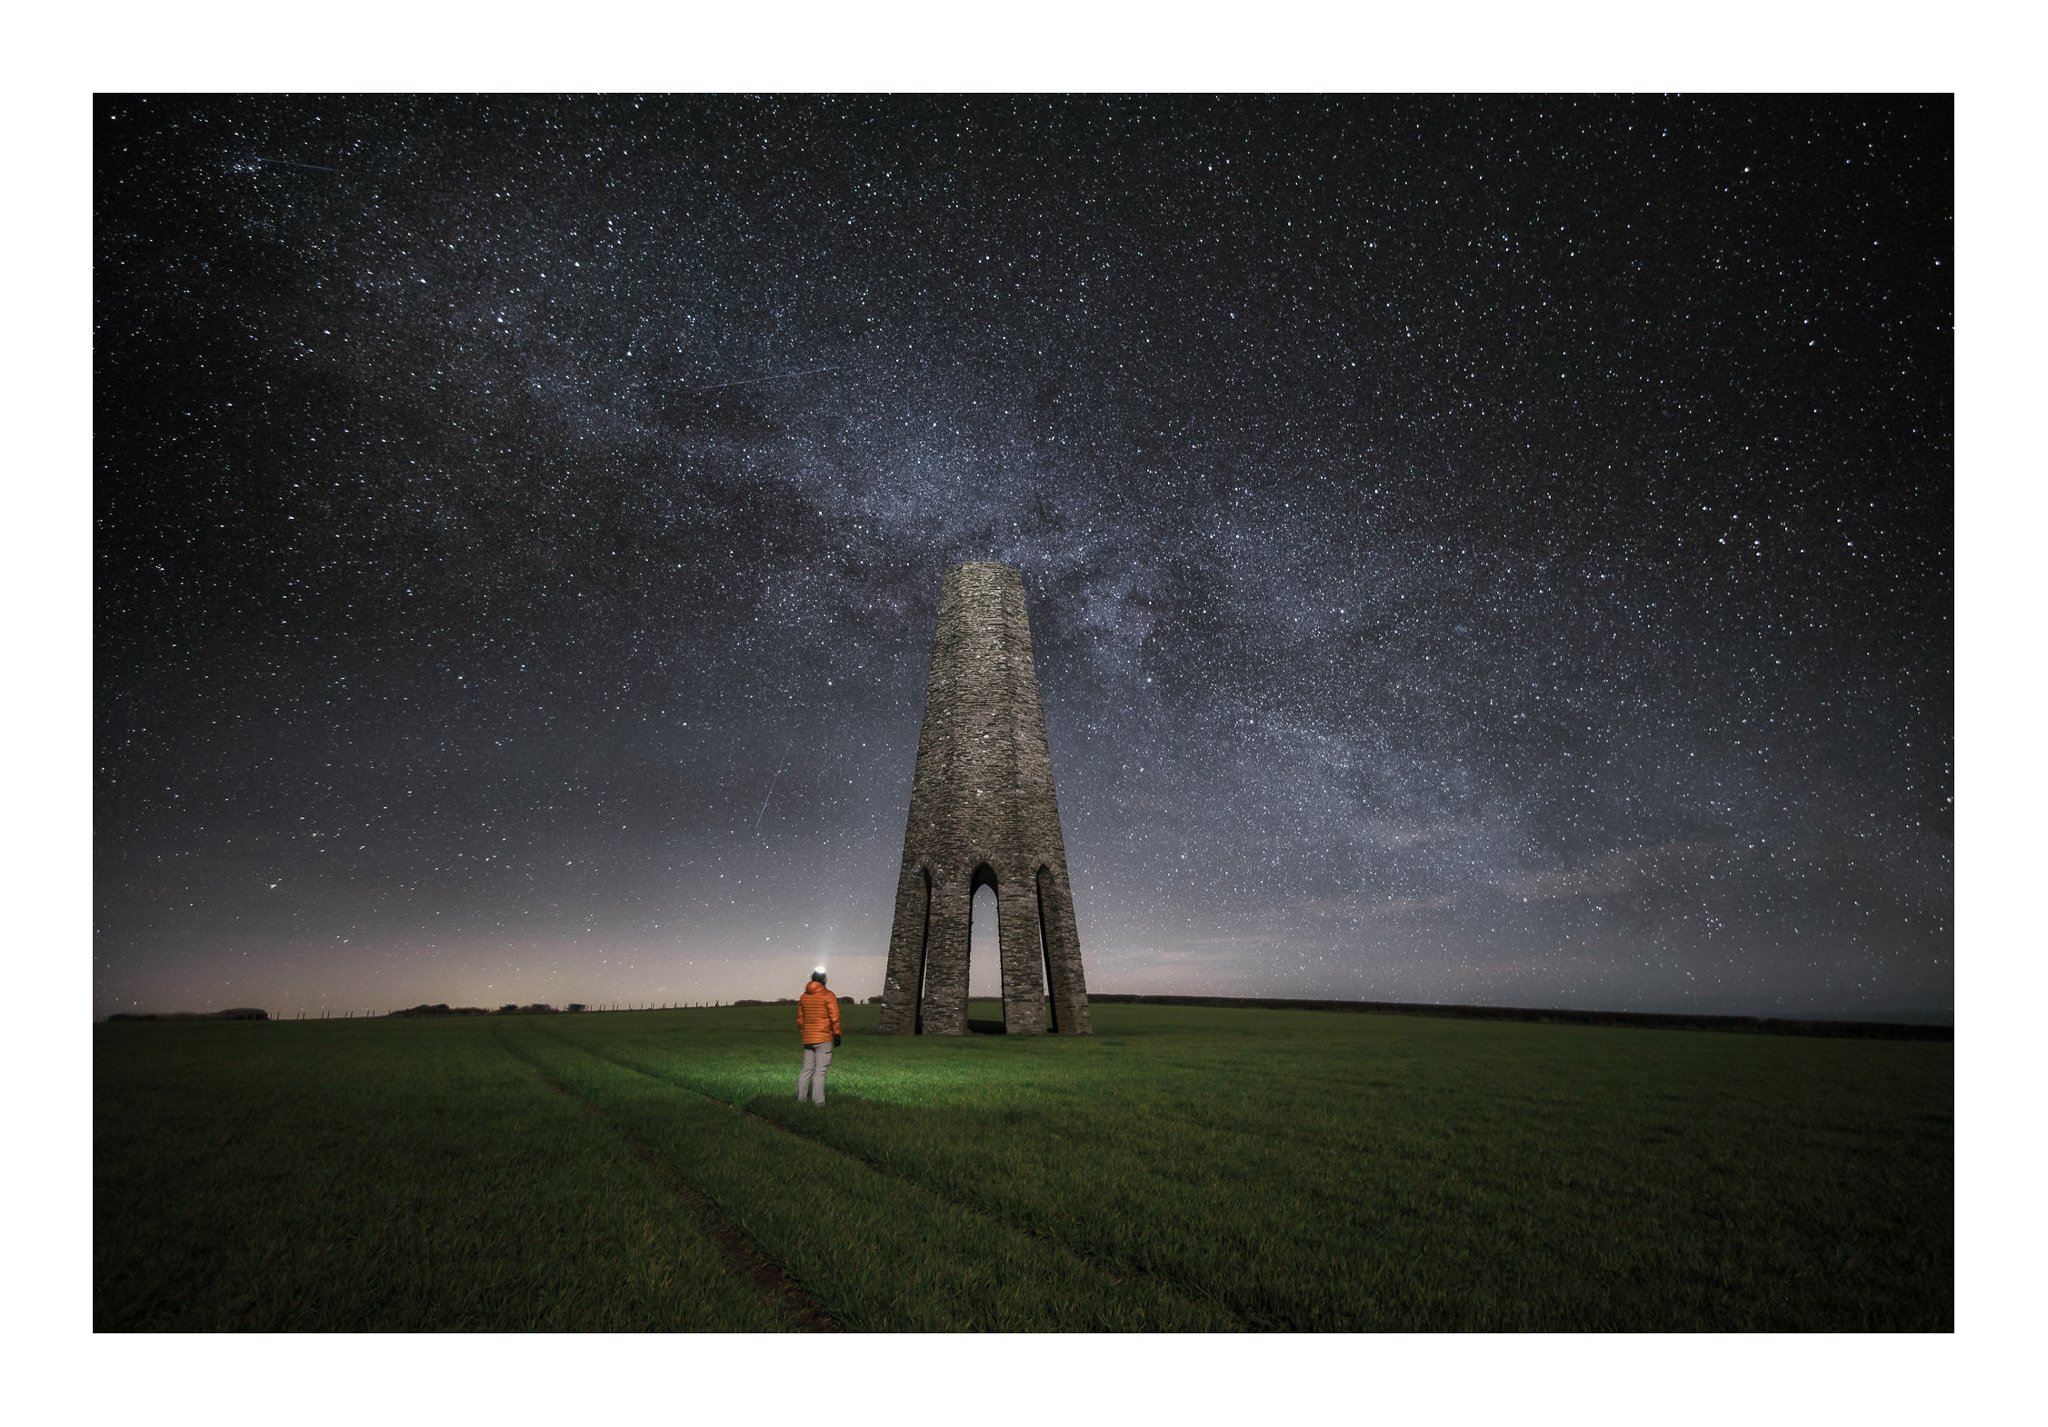 Andrew Campbell's Award-Winning Astrophotography Will Stun You